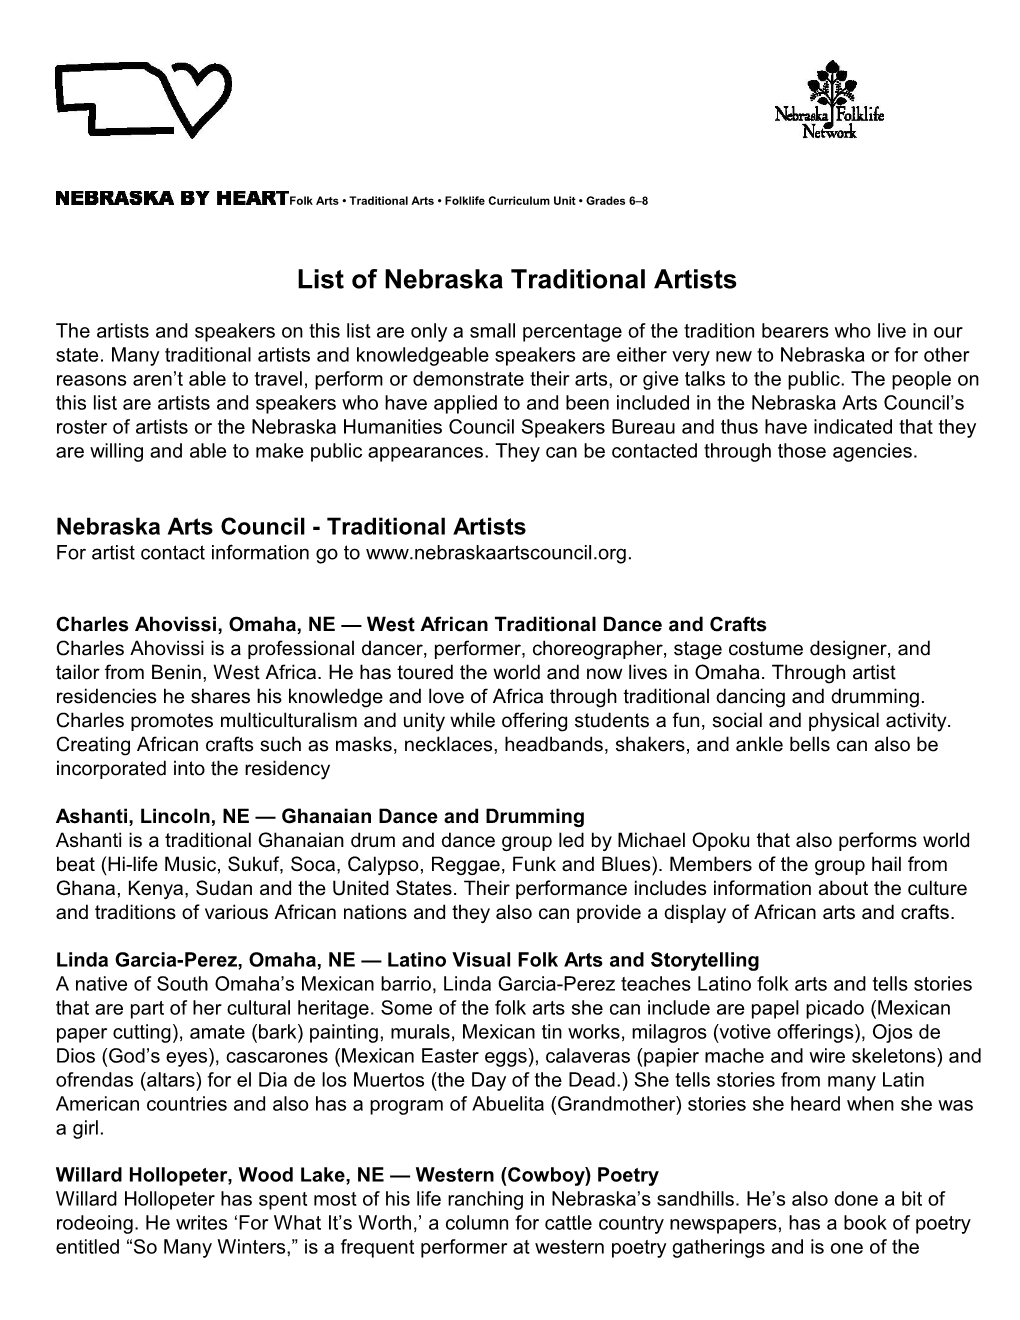 List of Traditional Artists